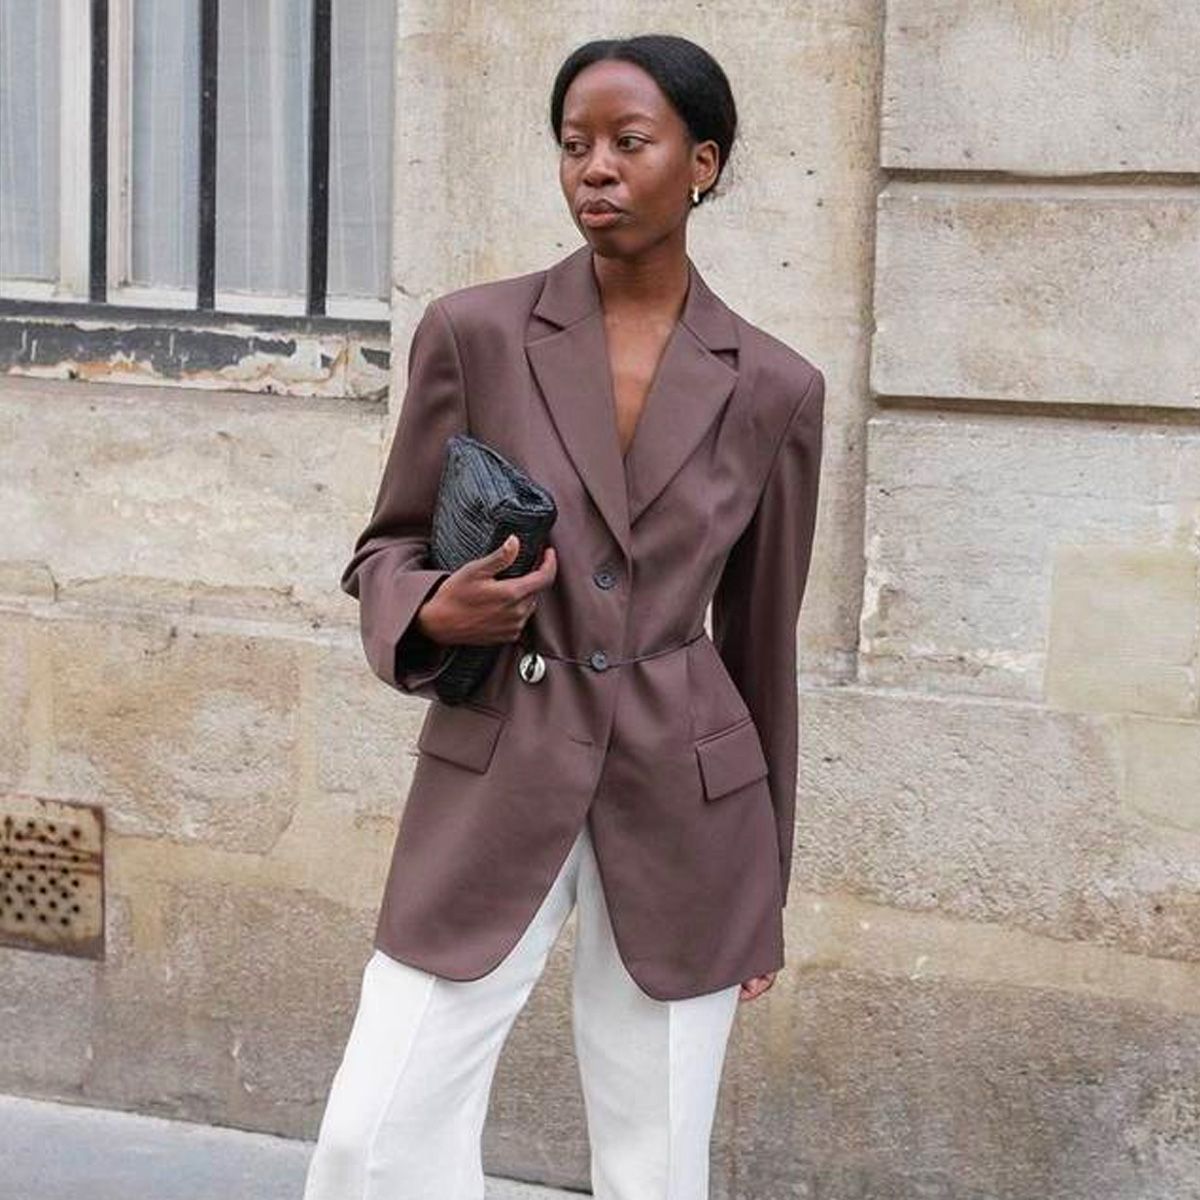 Dress Jackets & Blazers for Women This Spring